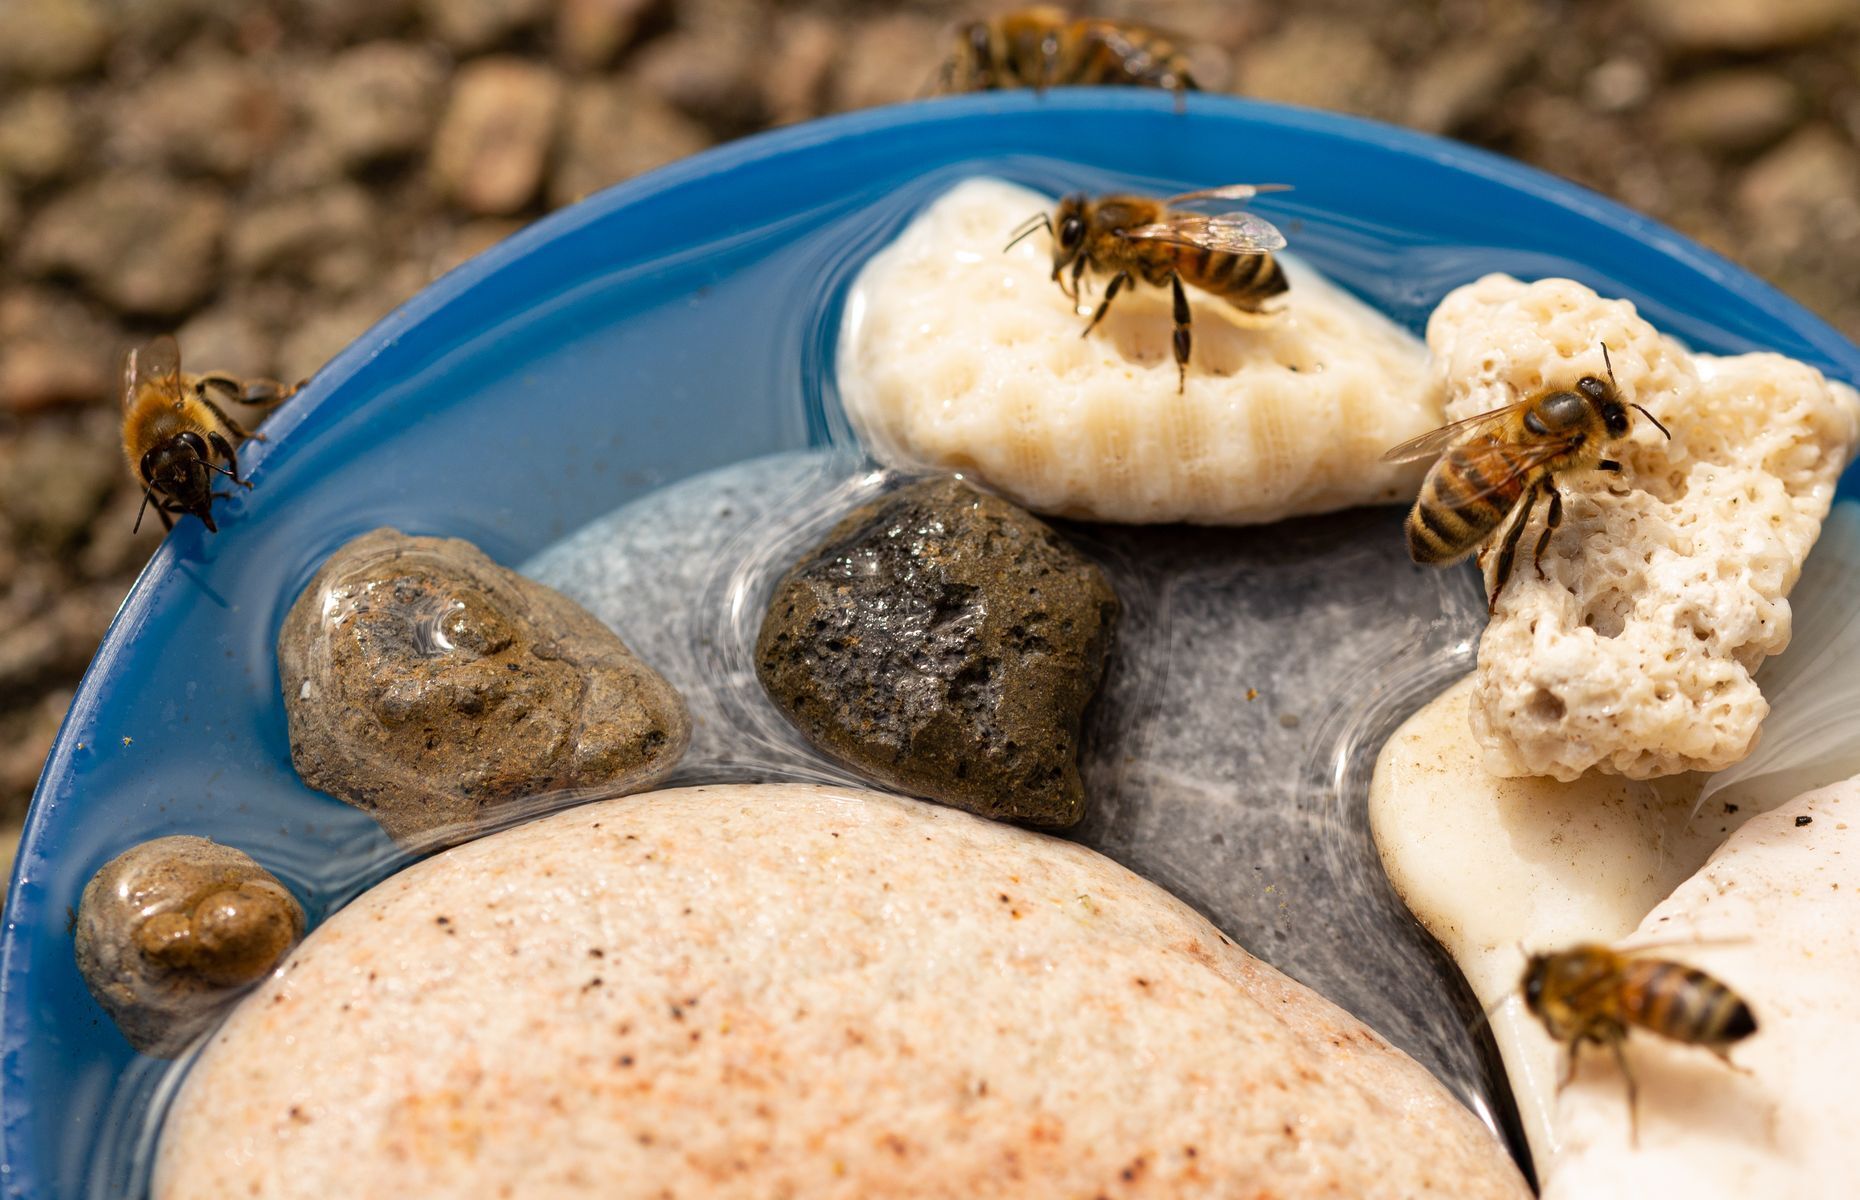 Because our foragers also need to drink, why not offer them and other pollinating insects a nice <a href="https://www.buddhabeeapiary.com/blog/bee-watering-station" rel="noreferrer noopener">waterer</a>? Simply place a few stones, marbles, or pebbles in a shallow pool to provide your guests with perches from which to quench their thirst without drowning. That’s it! Don't forget to change the water regularly, though, to prevent your waterer from becoming a breeding ground for mosquitoes.